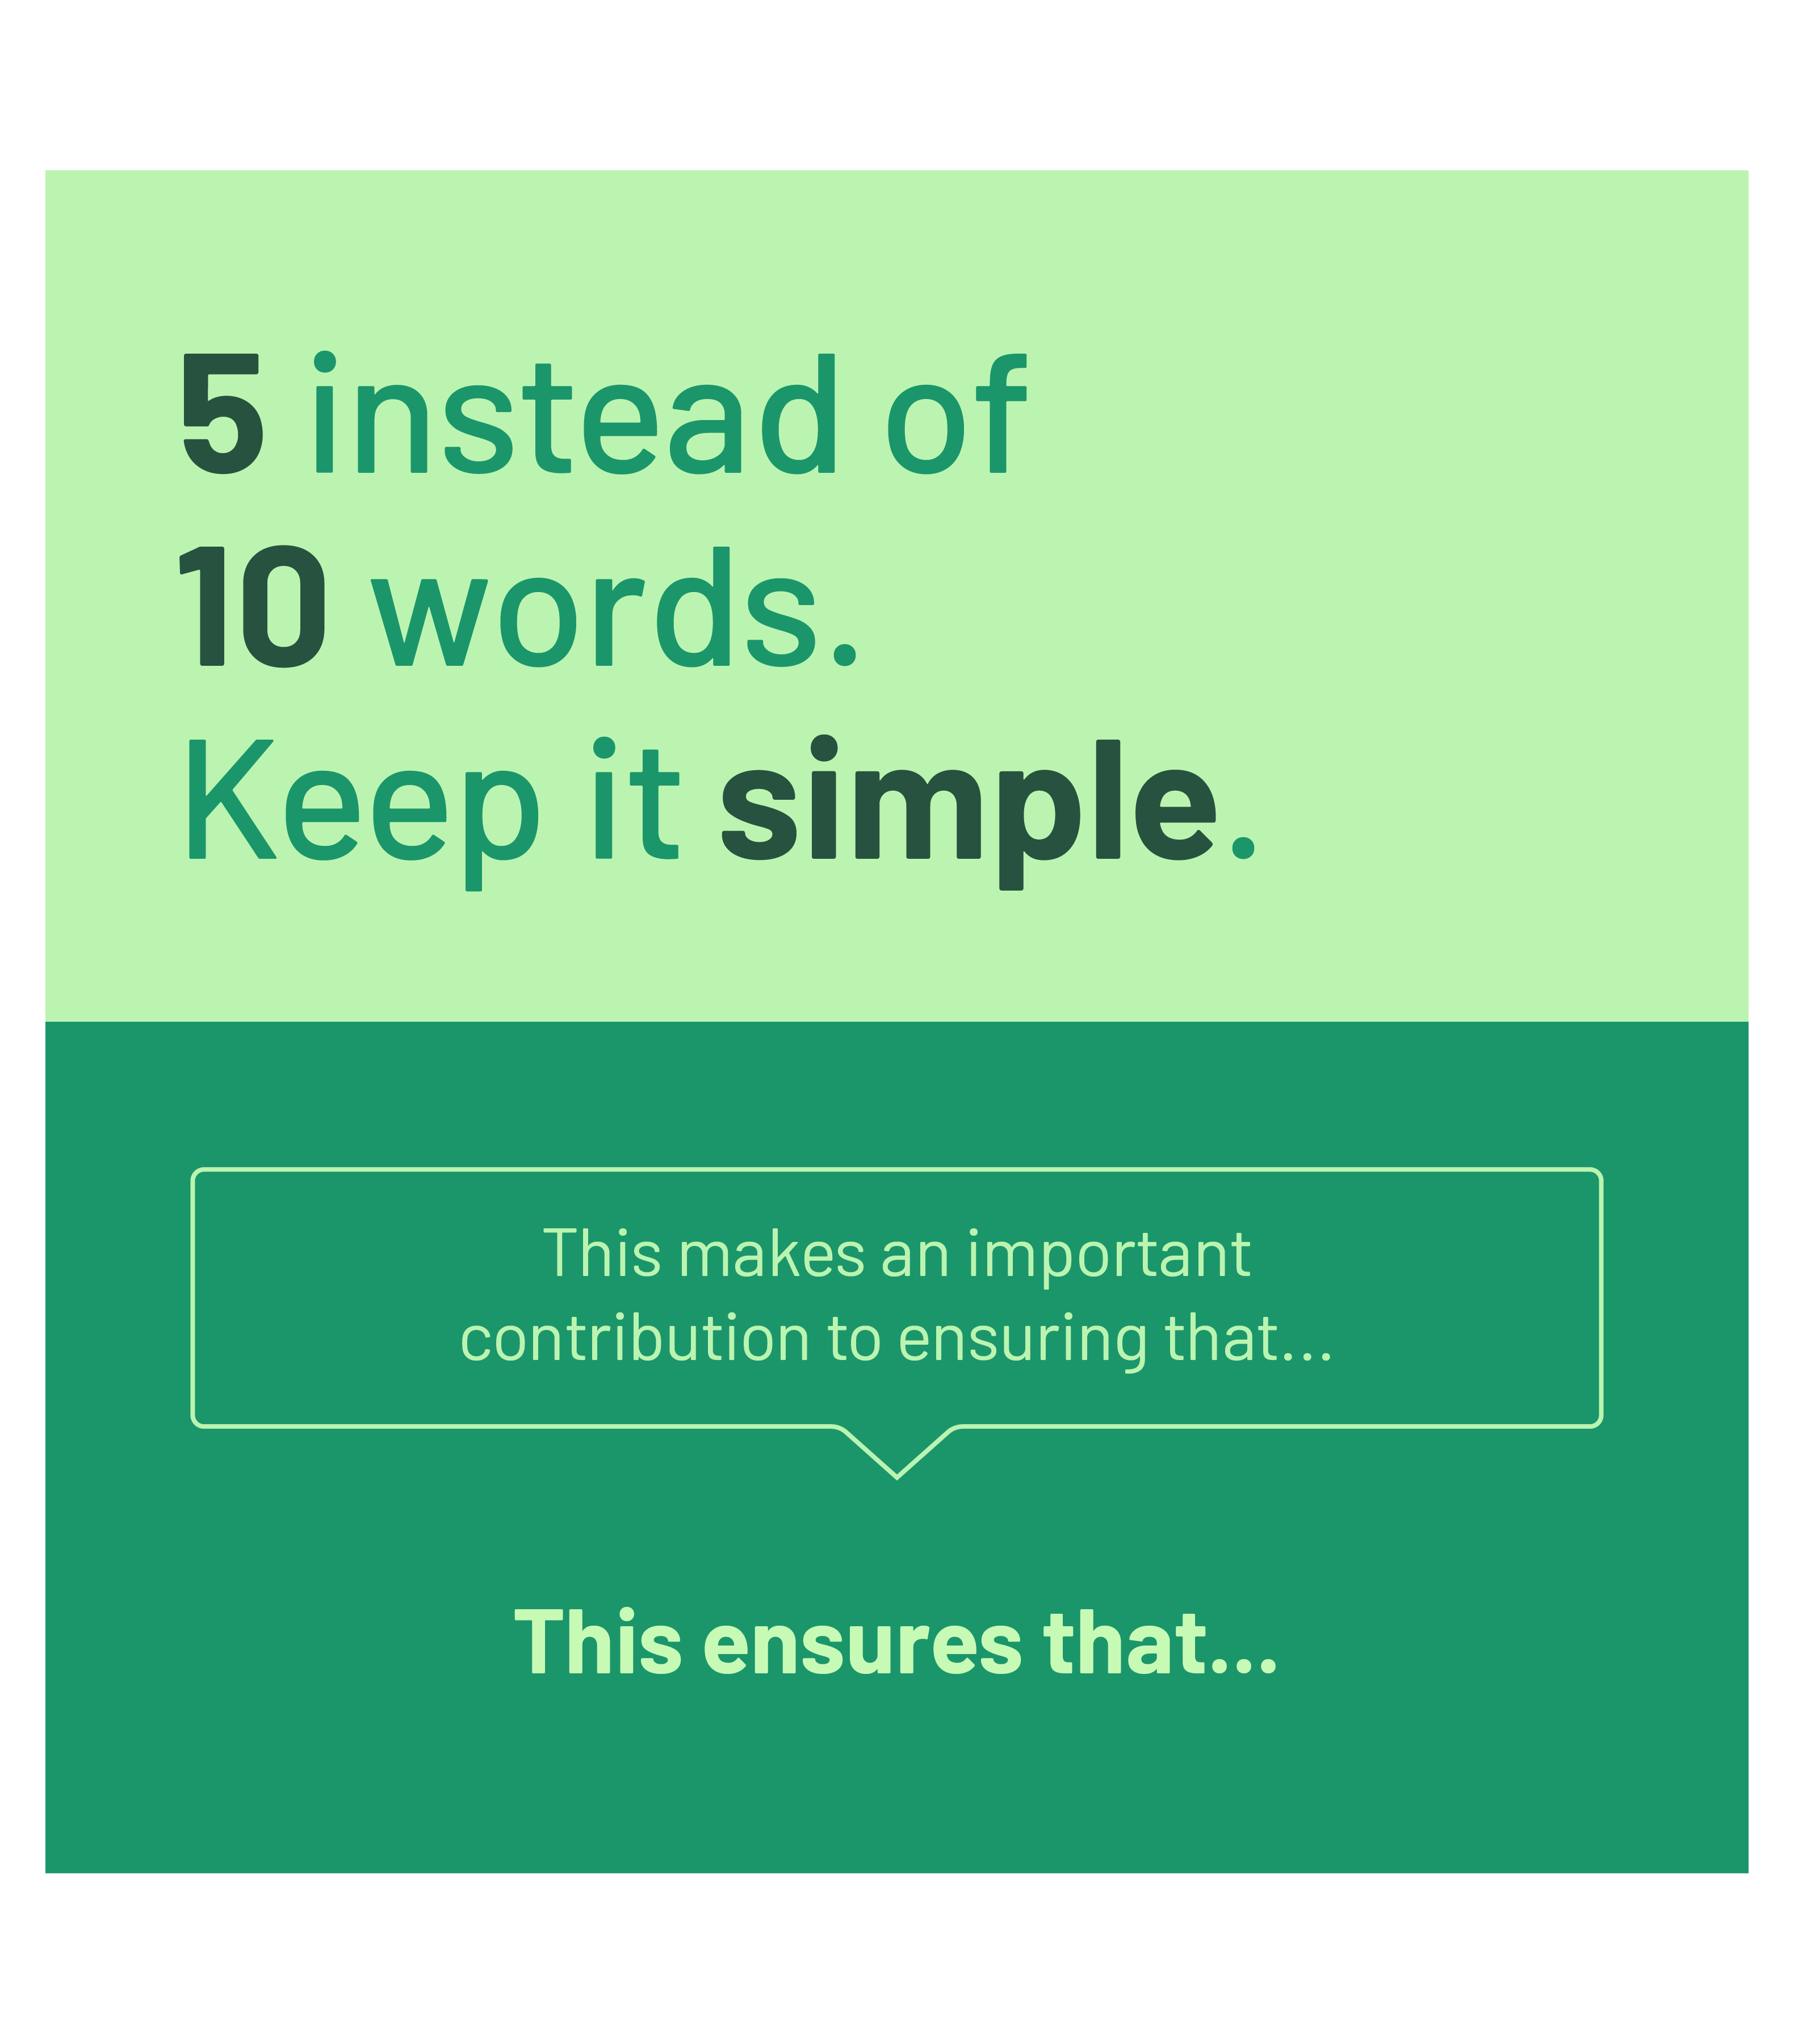 5 instead of 10 words. Keep it simple, with example.